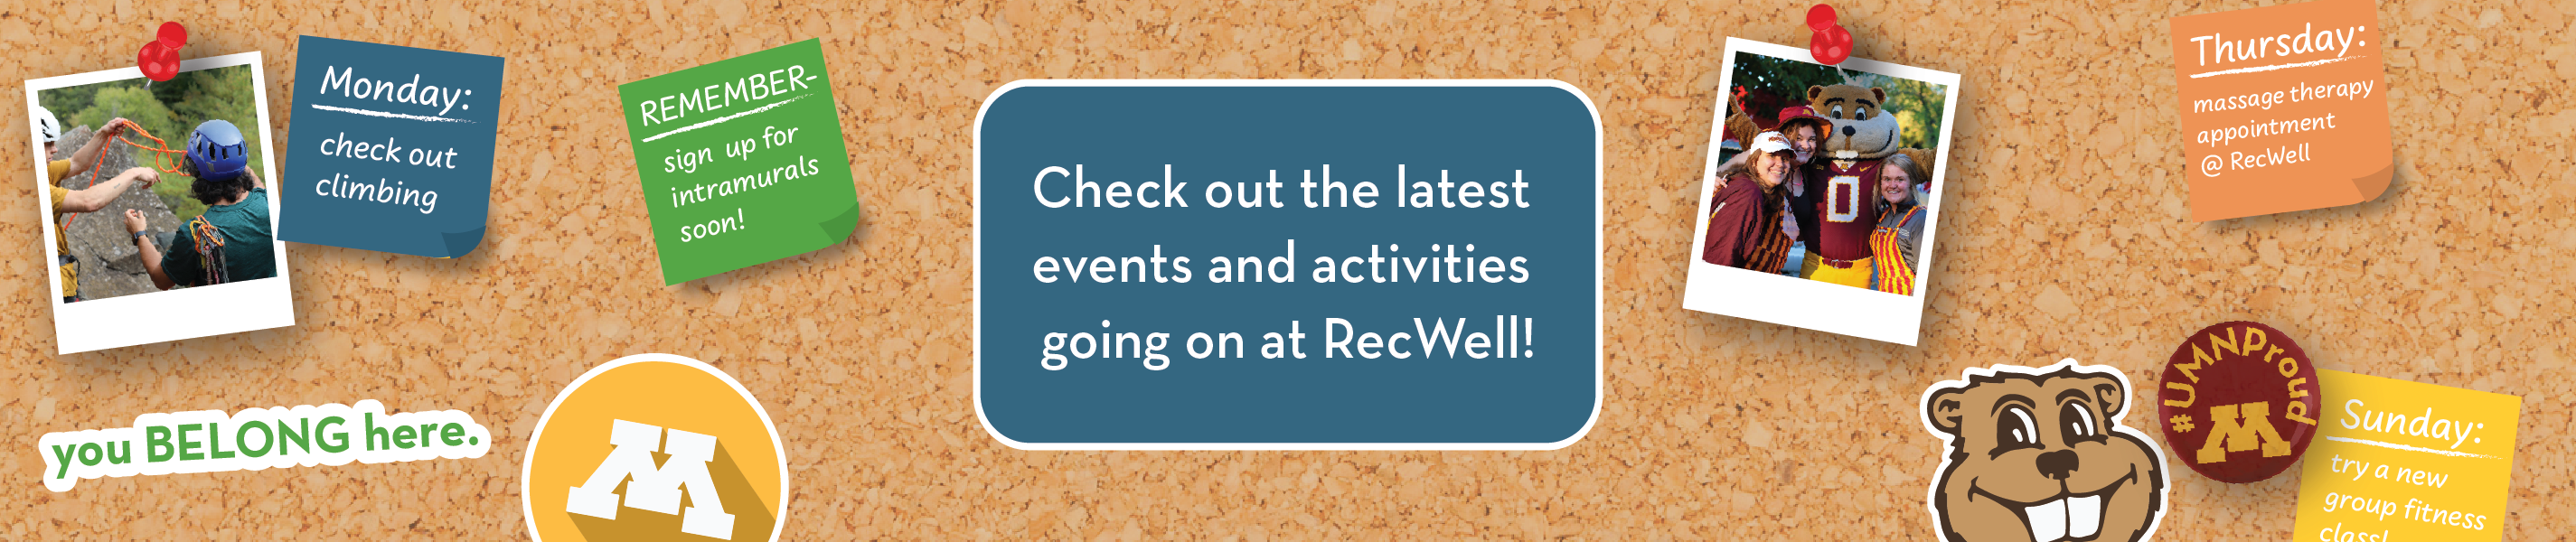 bulletin board graphic with recwell stickers, reminders, and the header "check out the latest events and activities going on at RecWell"